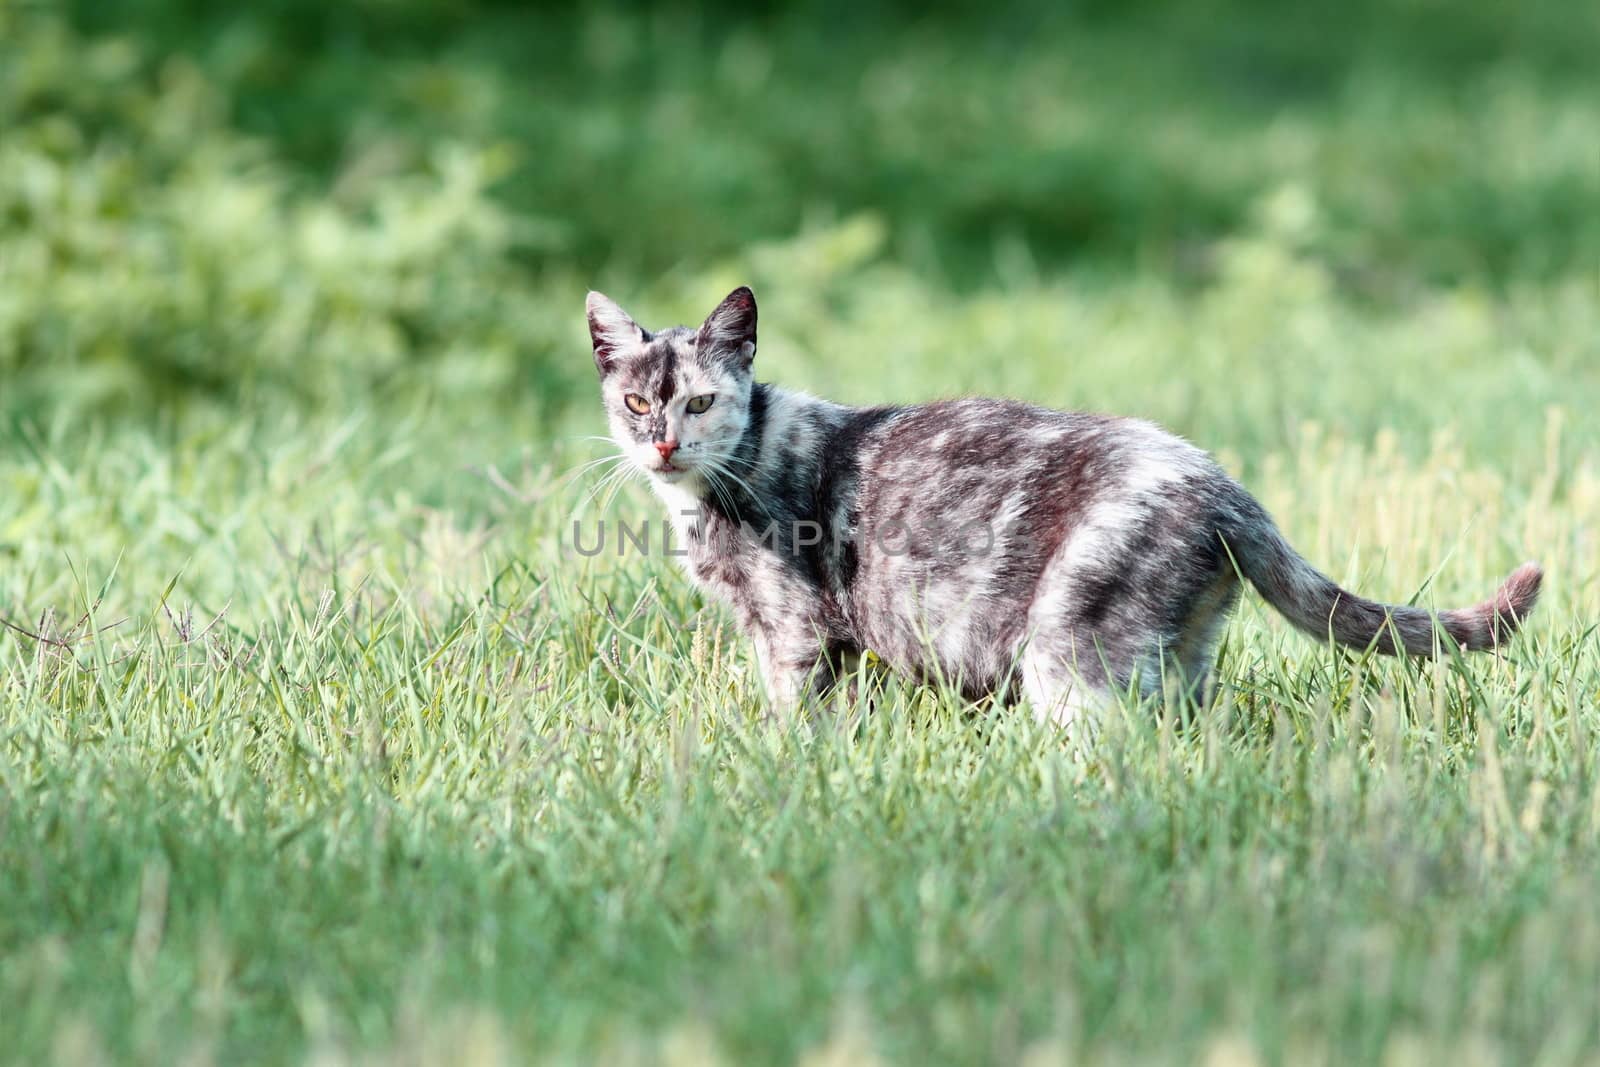 mottled beautiful cat standing in the green grass